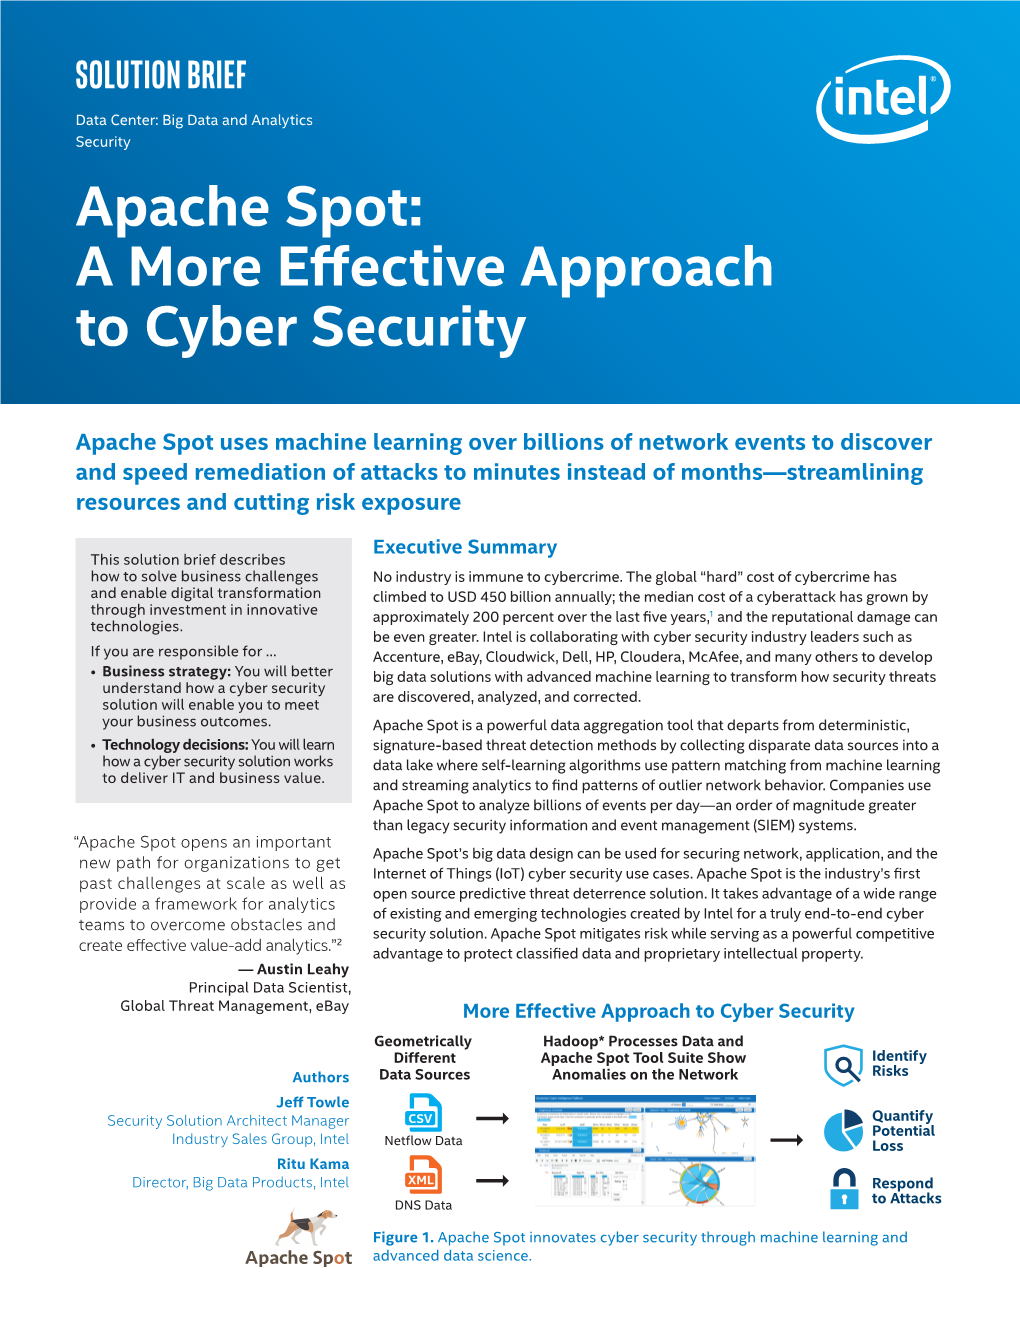 Apache Spot: a More Effective Approach to Cyber Security